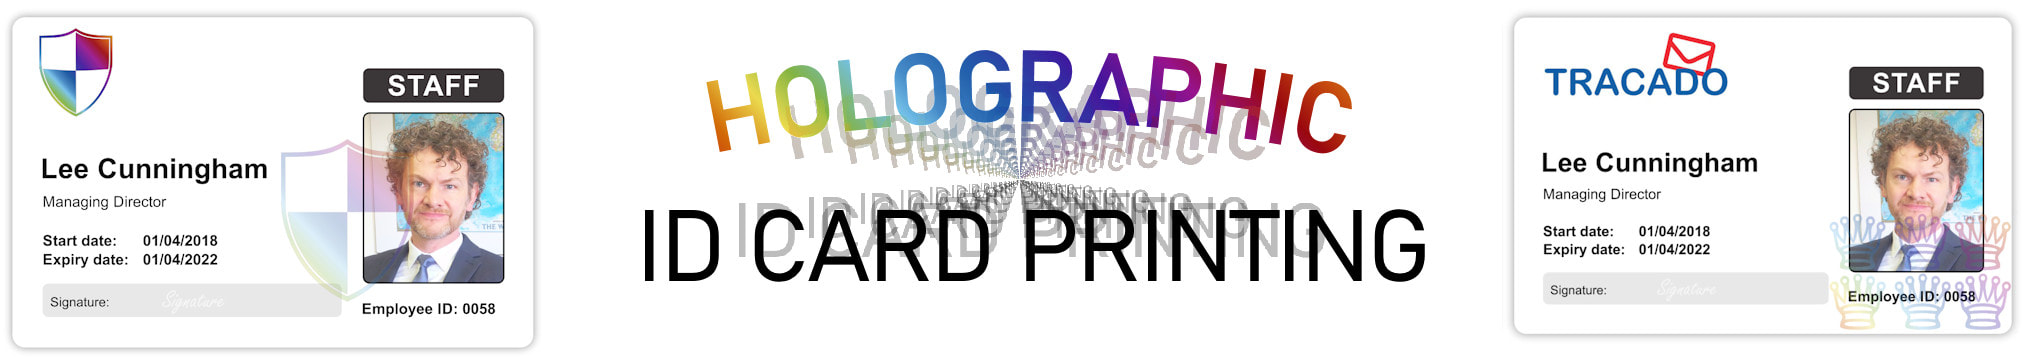 Birmingham holographic ID card print service. Employee Identity cards with hologram or holograph security mark.